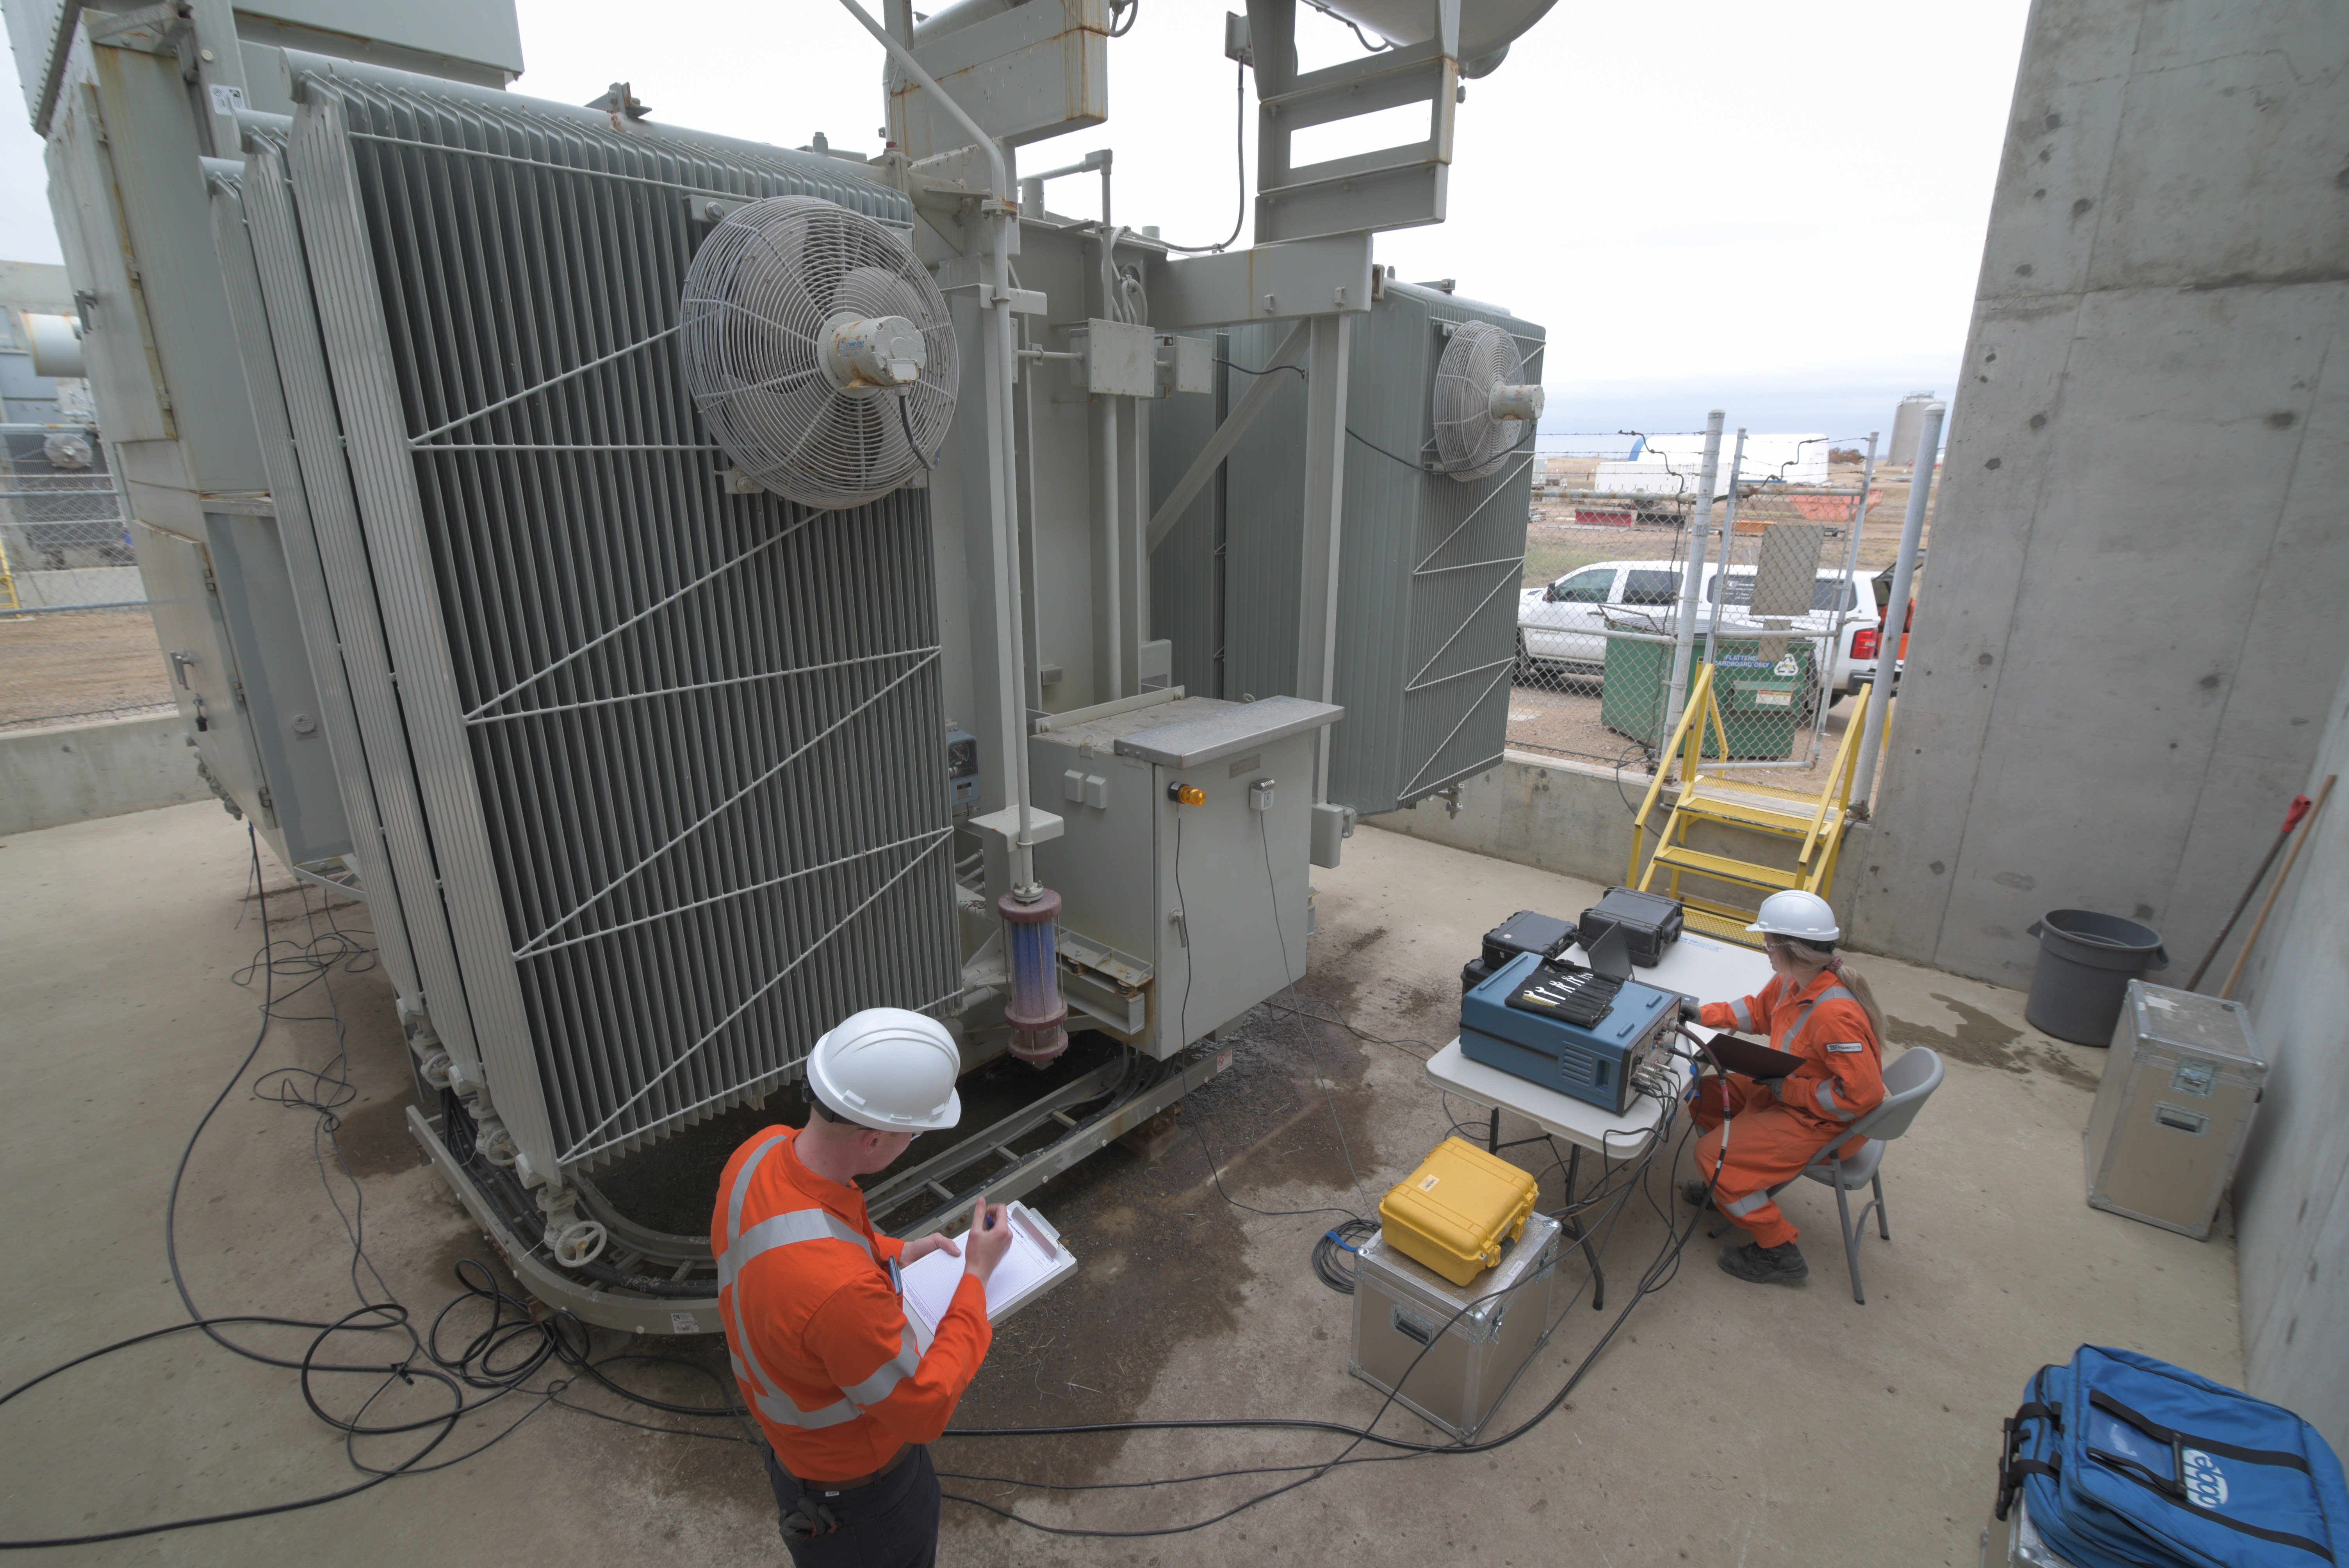 Dynamo employees using diagnostic instrumentation hooked up to larg transformer to run diagnostic check before performing a shutdown.